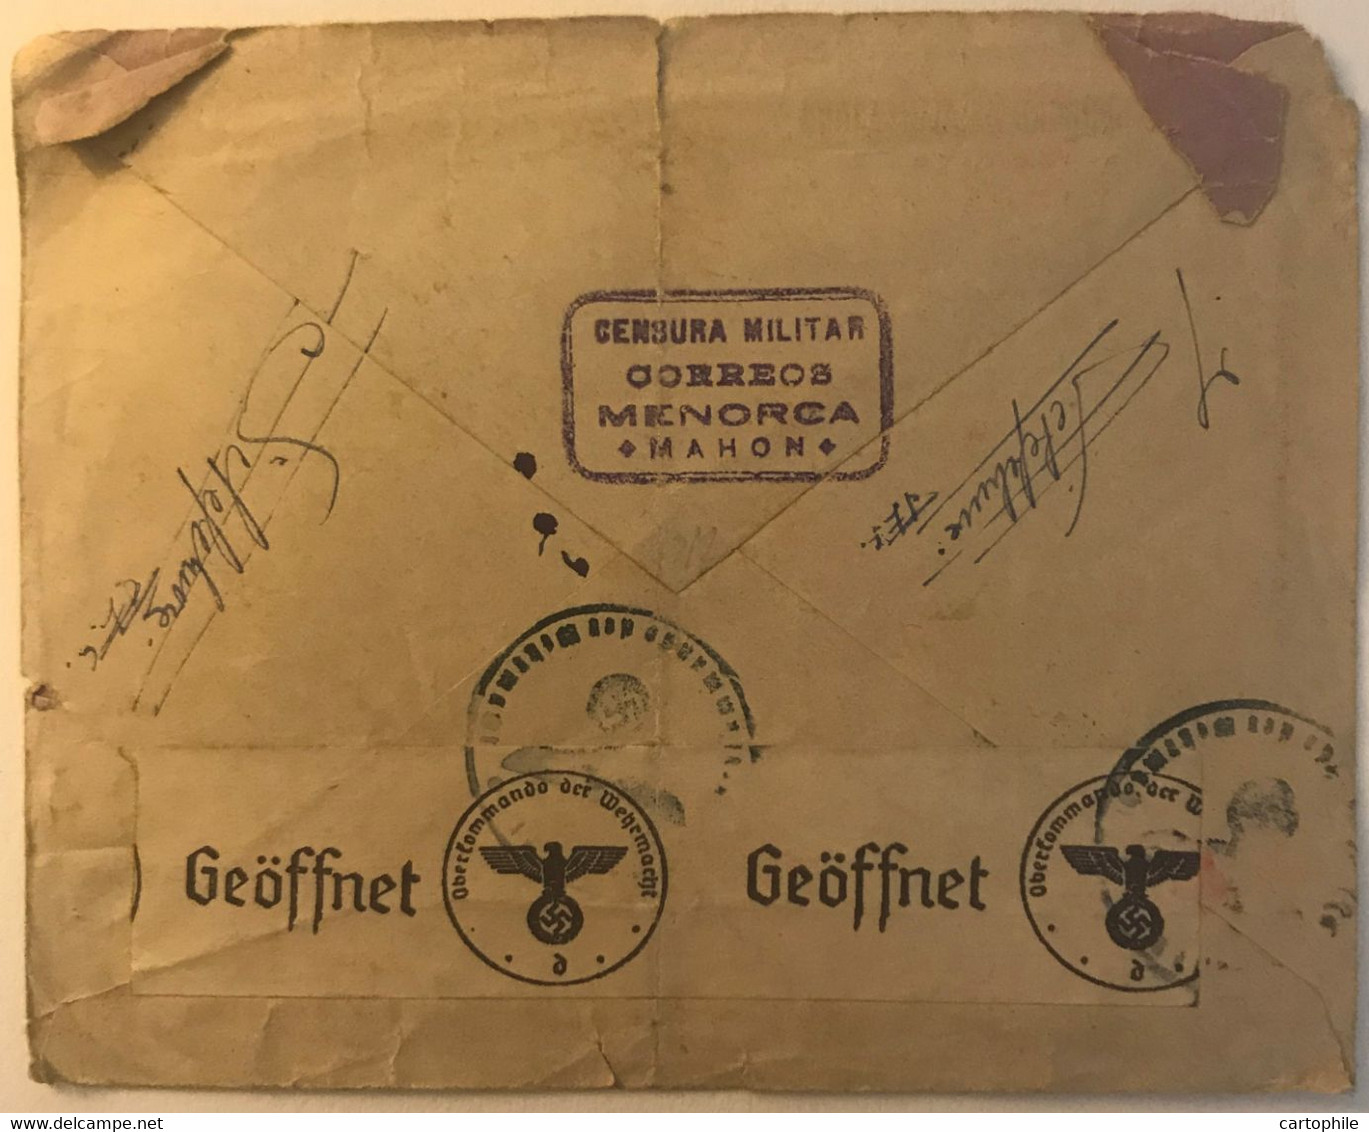 Rare Letter From Mahon To Paris (zone Occupée) With Doble Censura Militar Correos Menorca & Wehrmacht Germany 1943 WW2 - Nationalists Censor Marks